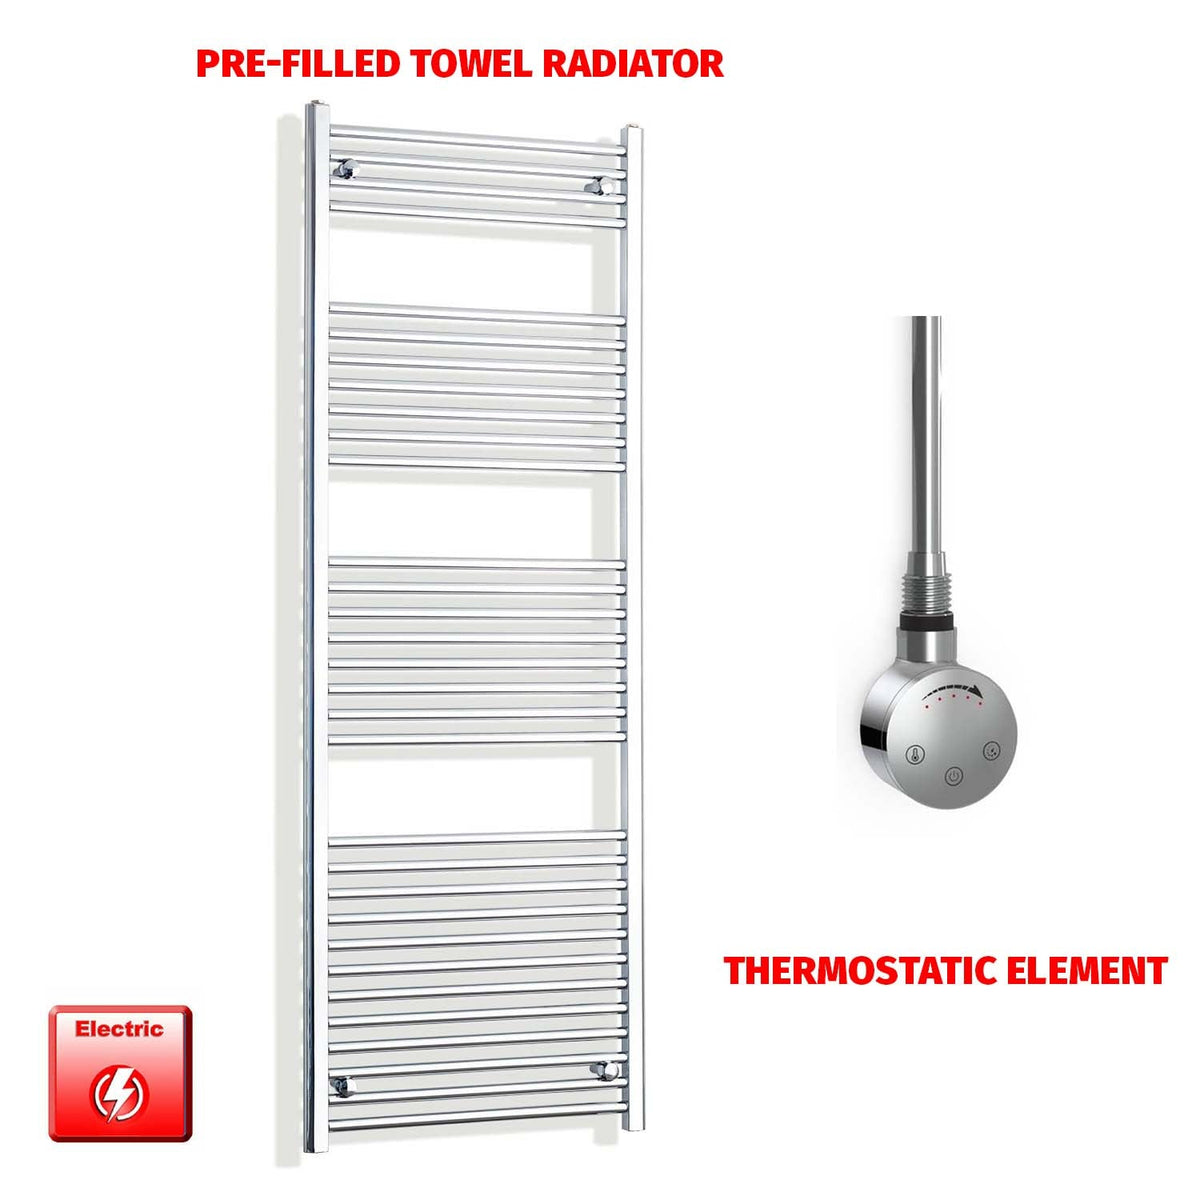 1800mm High 550mm Wide Electric Heated Towel Radiator Straight Chrome SMR Thermostatic element no timer